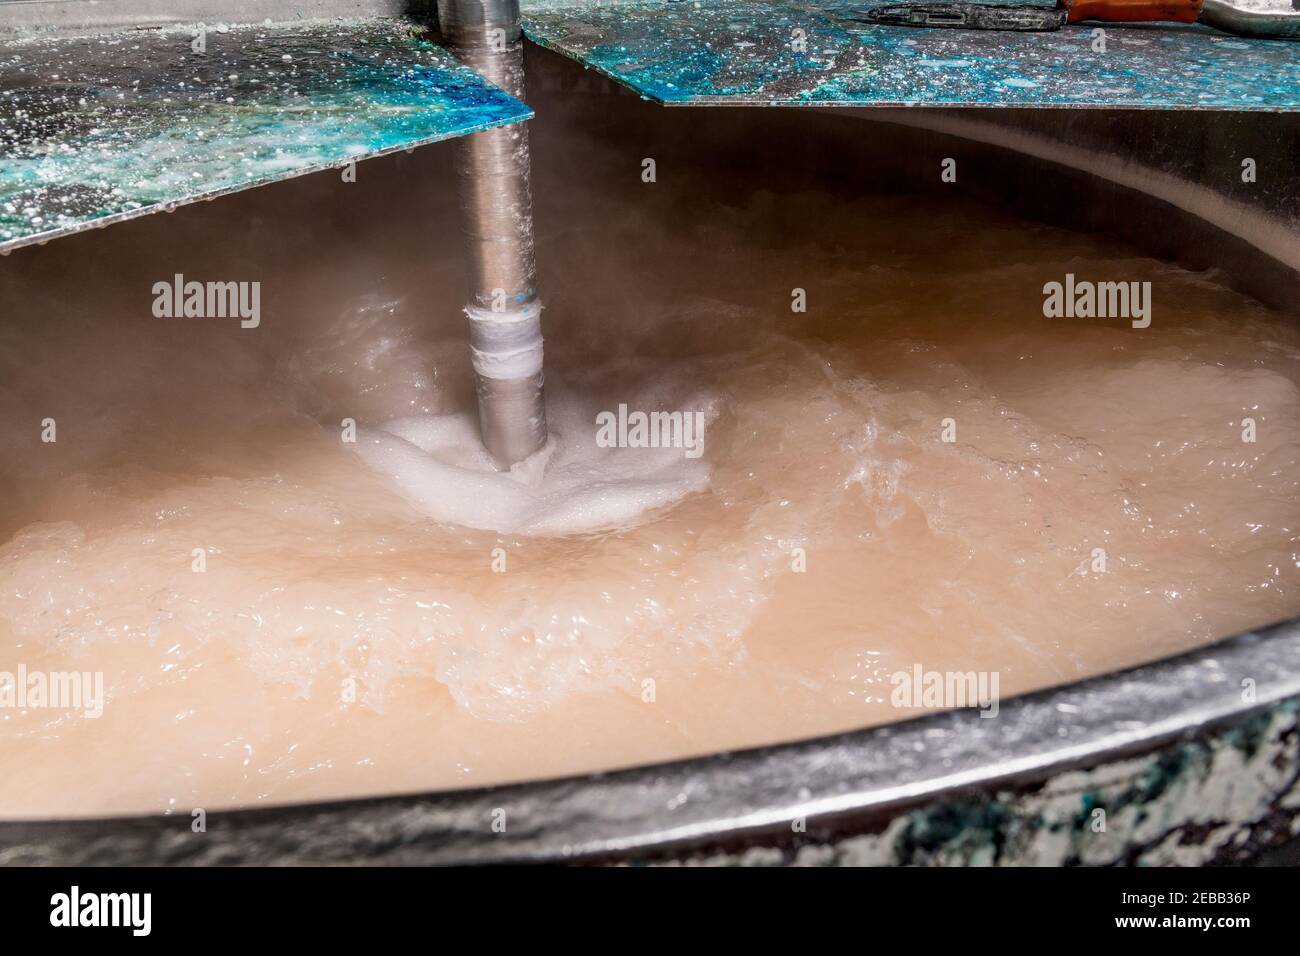 Swirling chemicals in industrial mixer detail Stock Photo